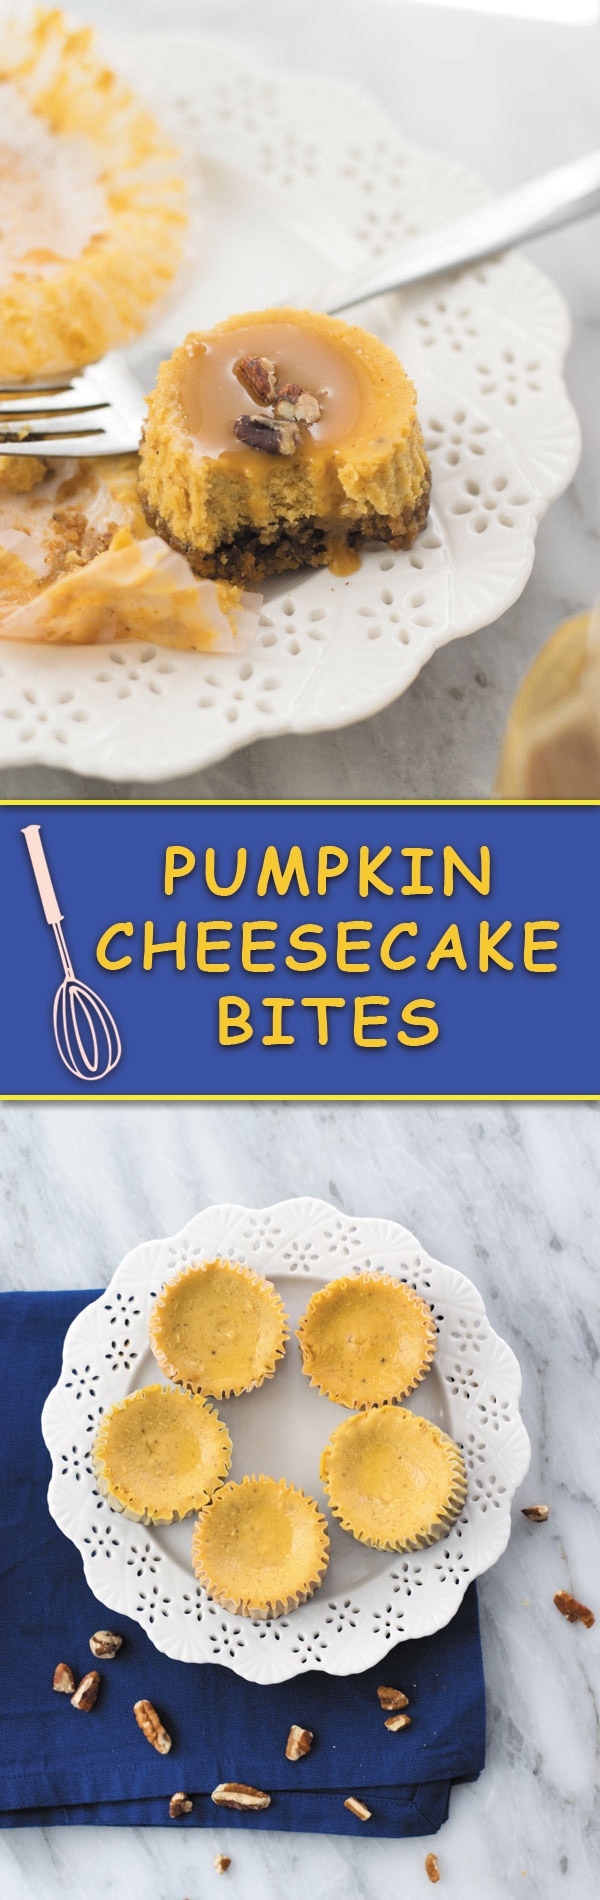 Pumpkin Cheesecake Bites - Delicious Pumpkin Cheesecake in bite forms, easy to serve with caramel sauce and chopped pecans! A perfect fall treat.